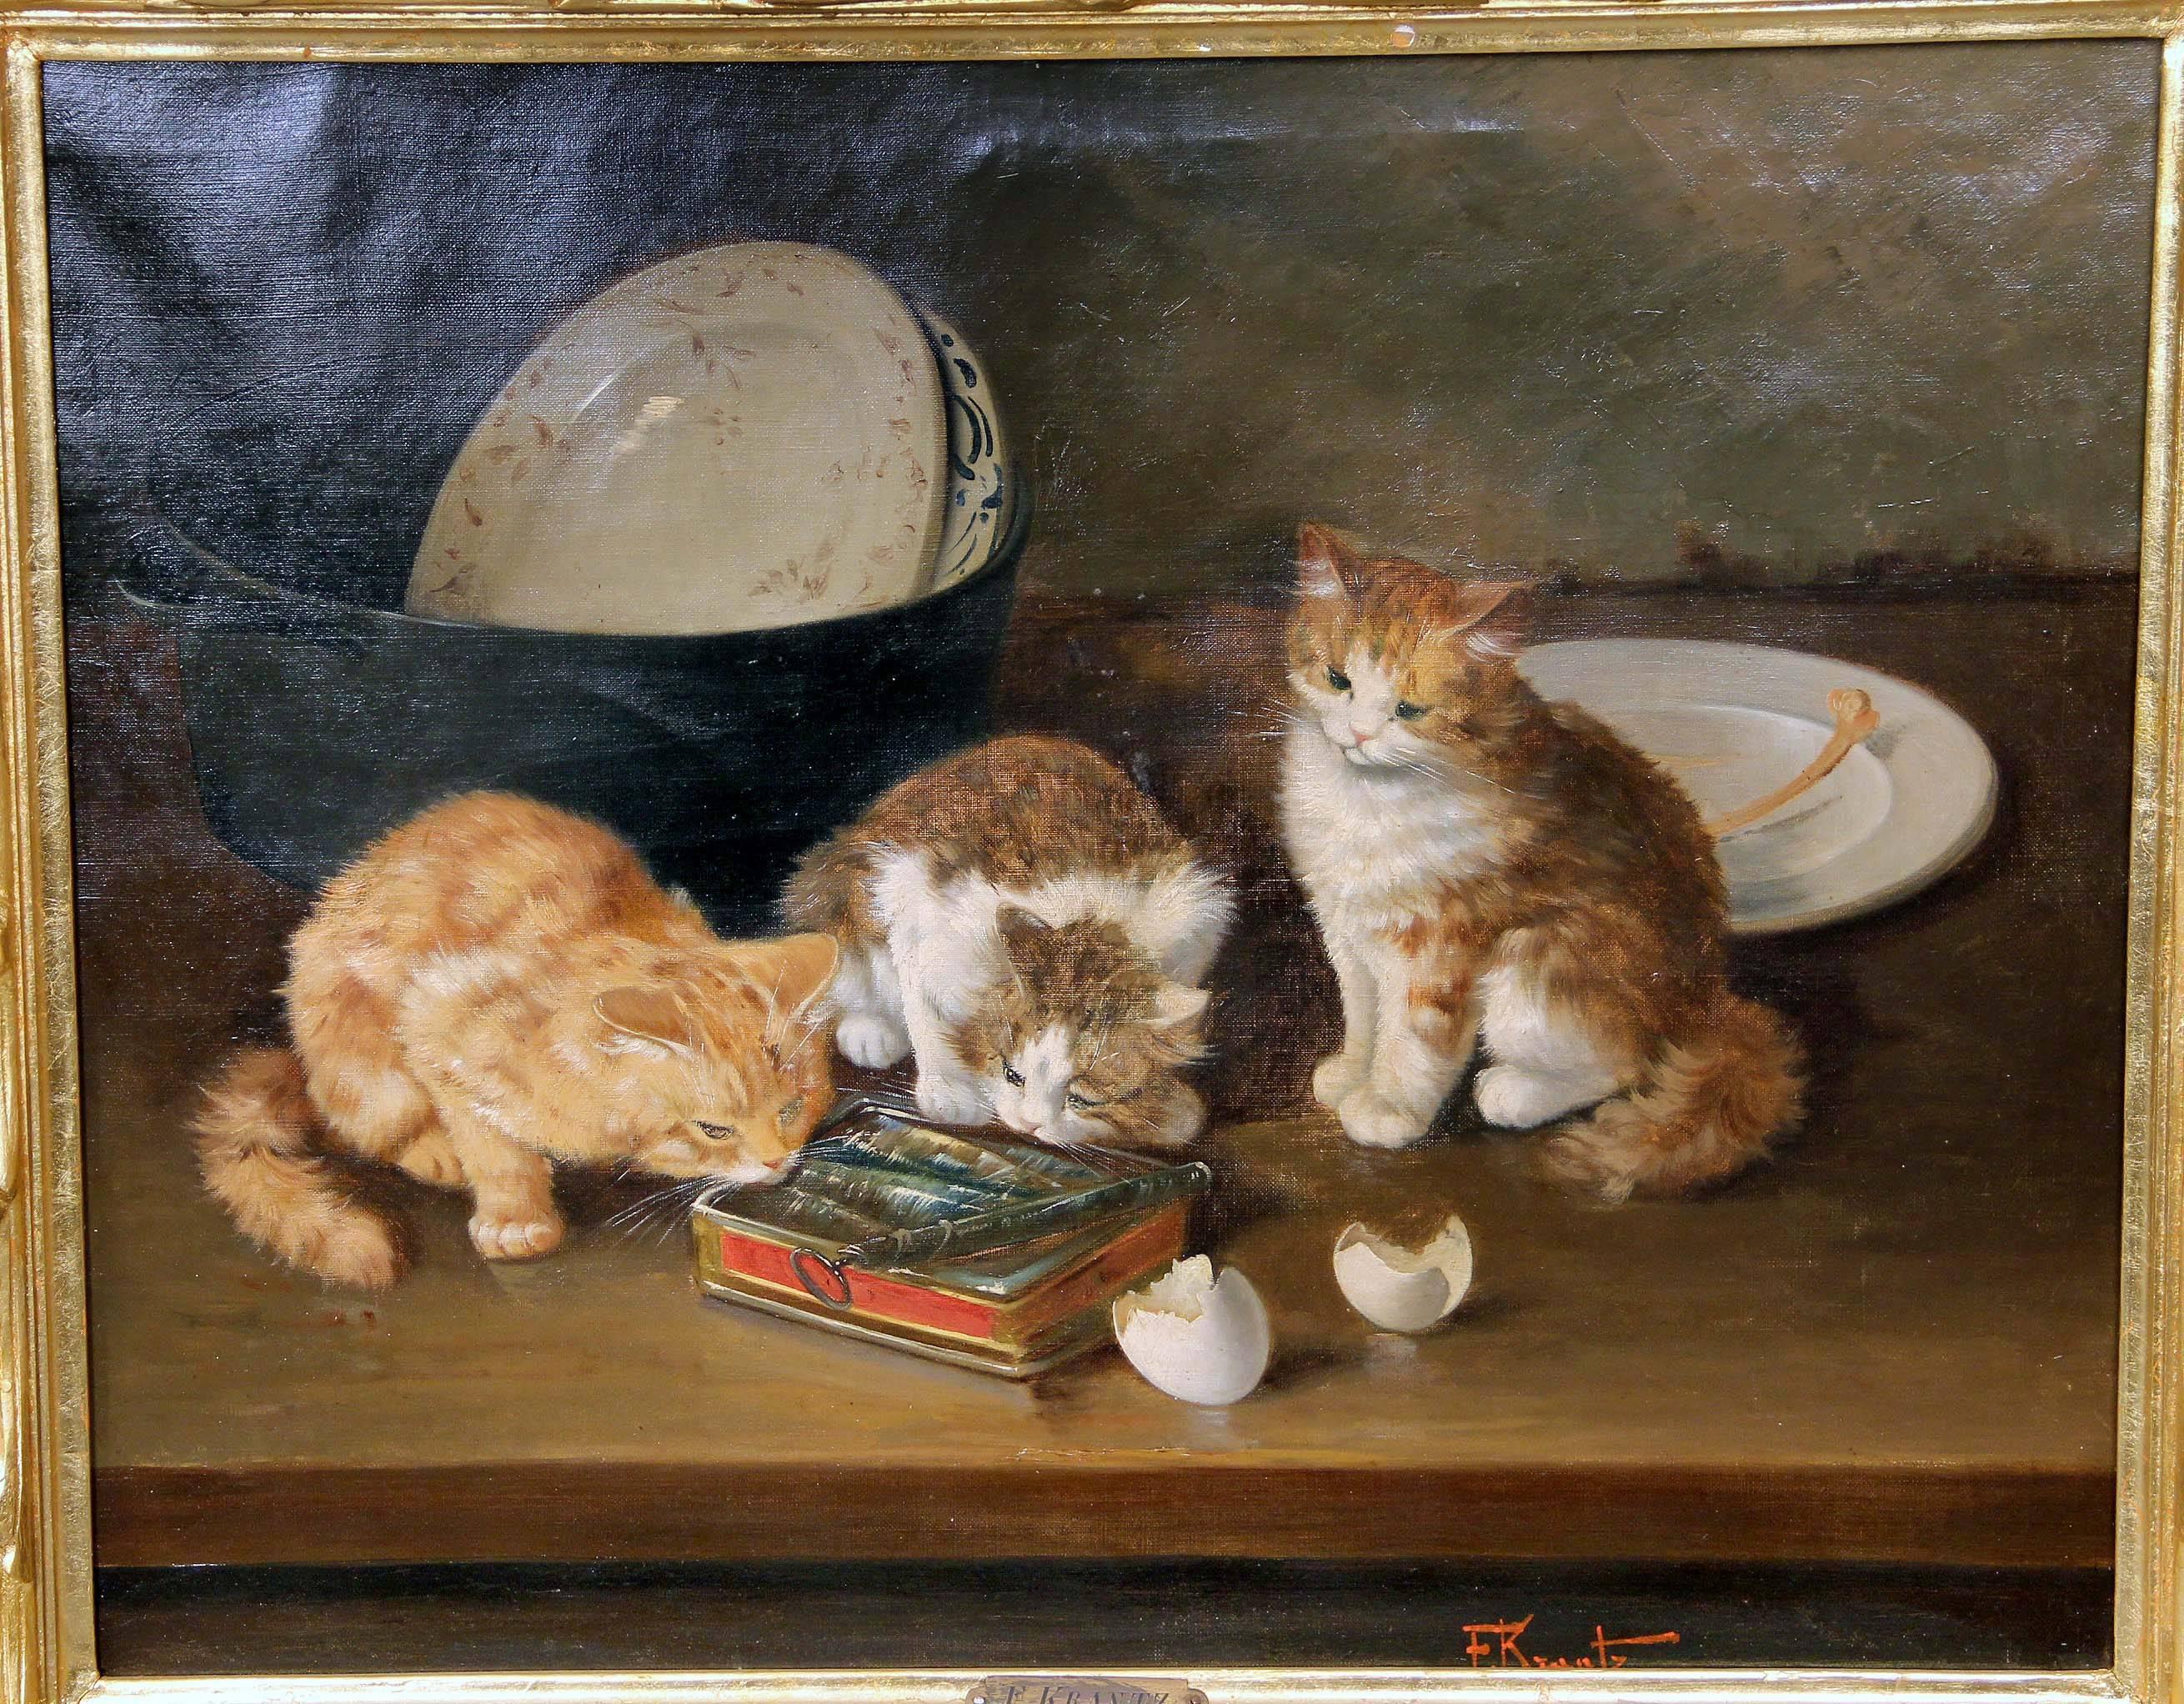 A beautiful pair of late 19th-early 20th century kitten paintings.

By F. Krantz (German).

Oil on canvas, with curious kittens. One painting with four kittens and a mouse trap, the other with three kittens and food. Each signed F. Krantz on the